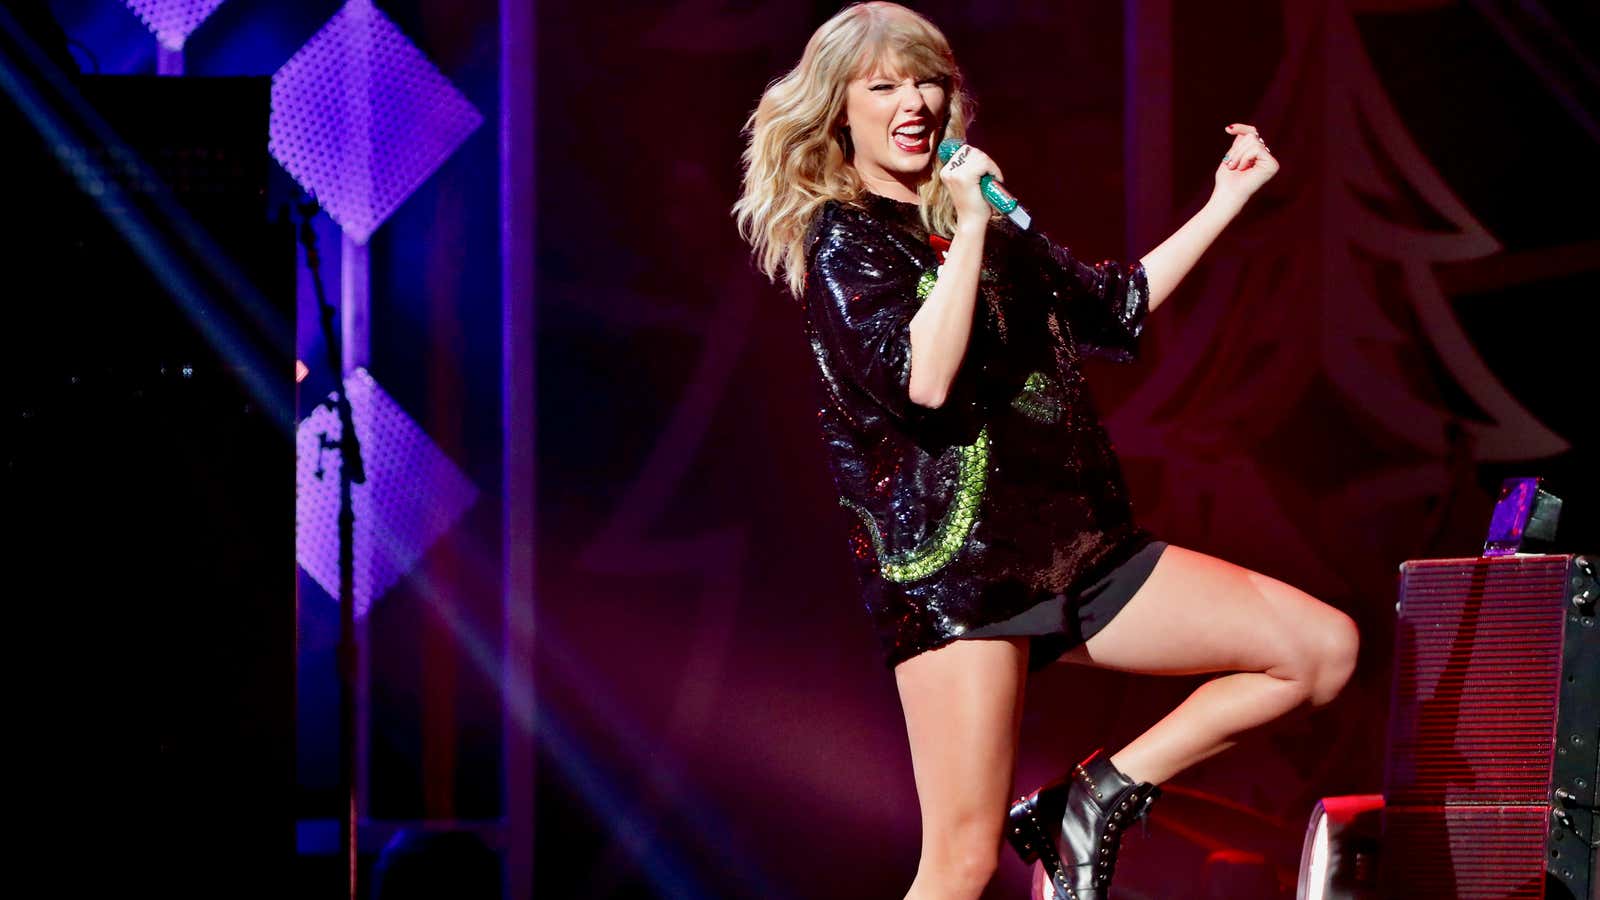 Swift could be singing a different tune soon enough, says judge.